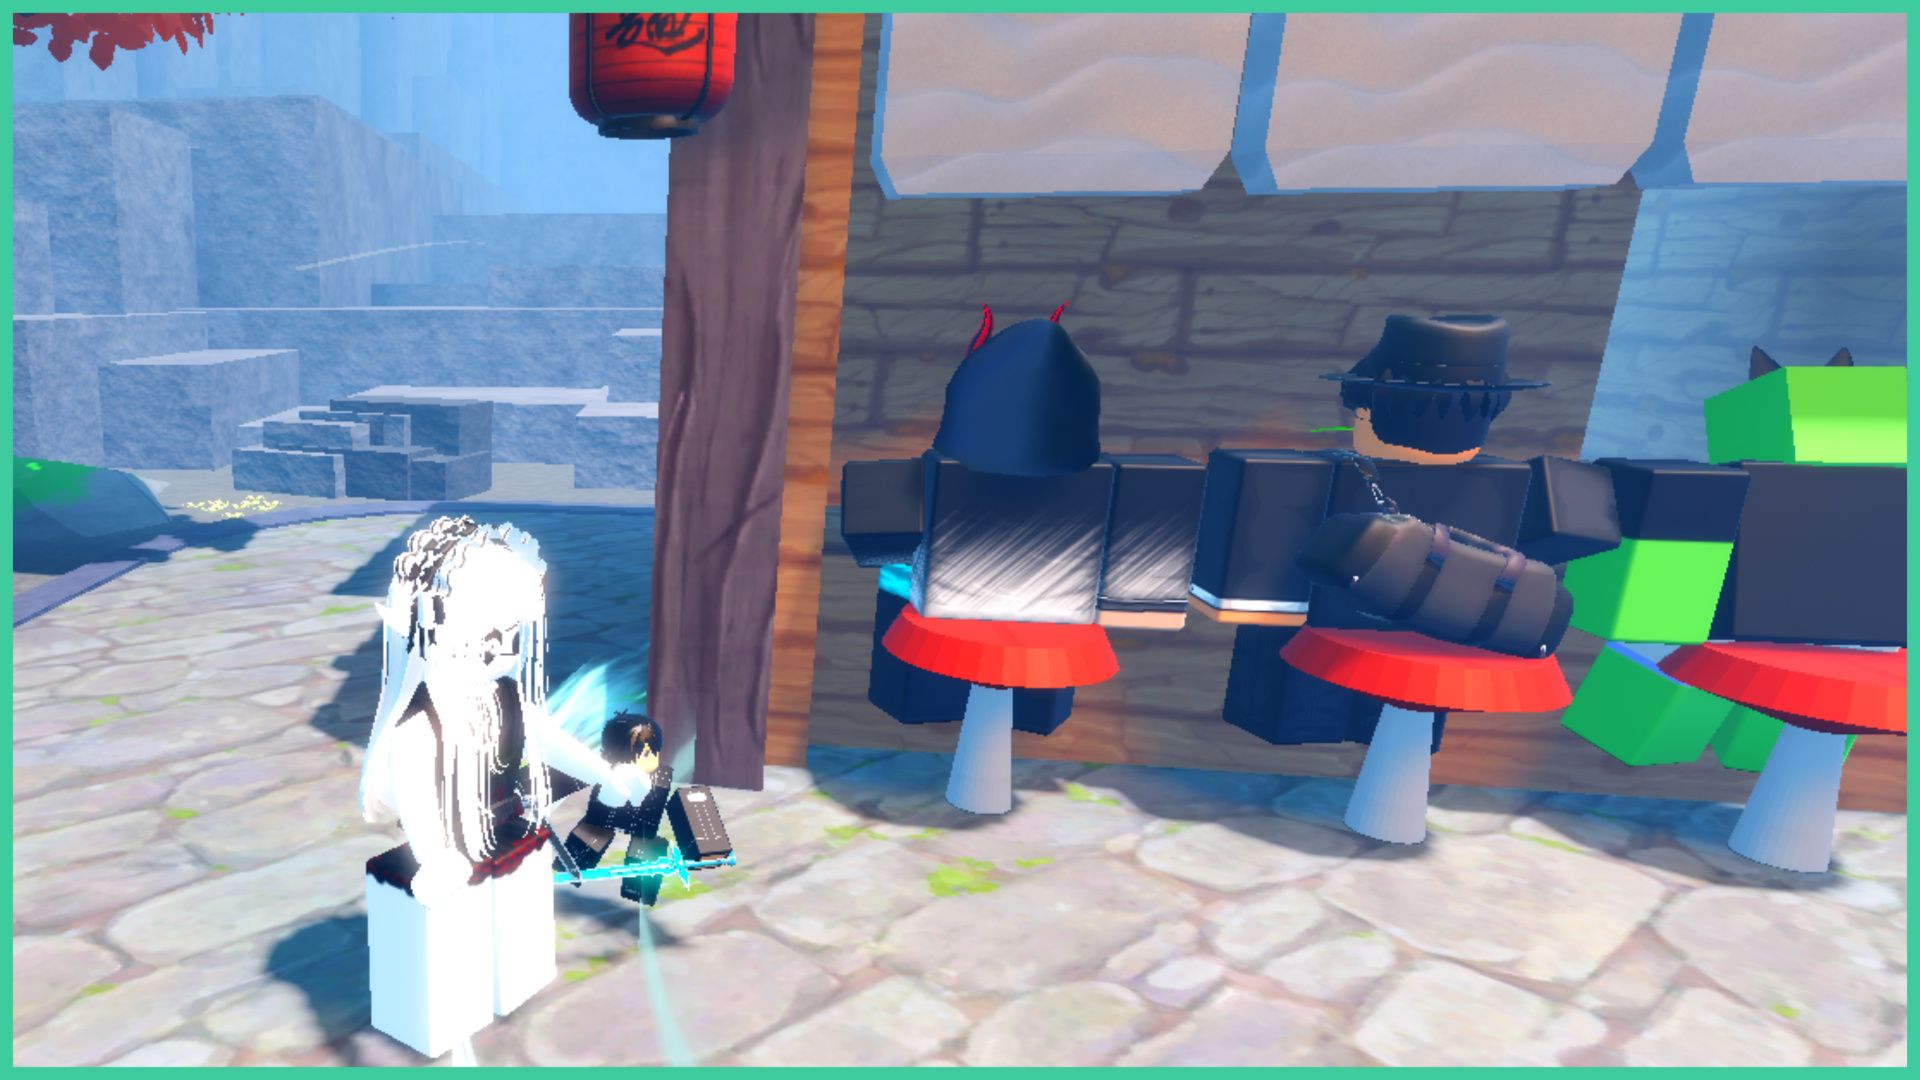 feature image for our anime last stand flame alchemist guide, the image features a roblox player standing by a food stall with bar stools as three characters face the counter, there is a lantern to the side of the stall, with rock formations in the background